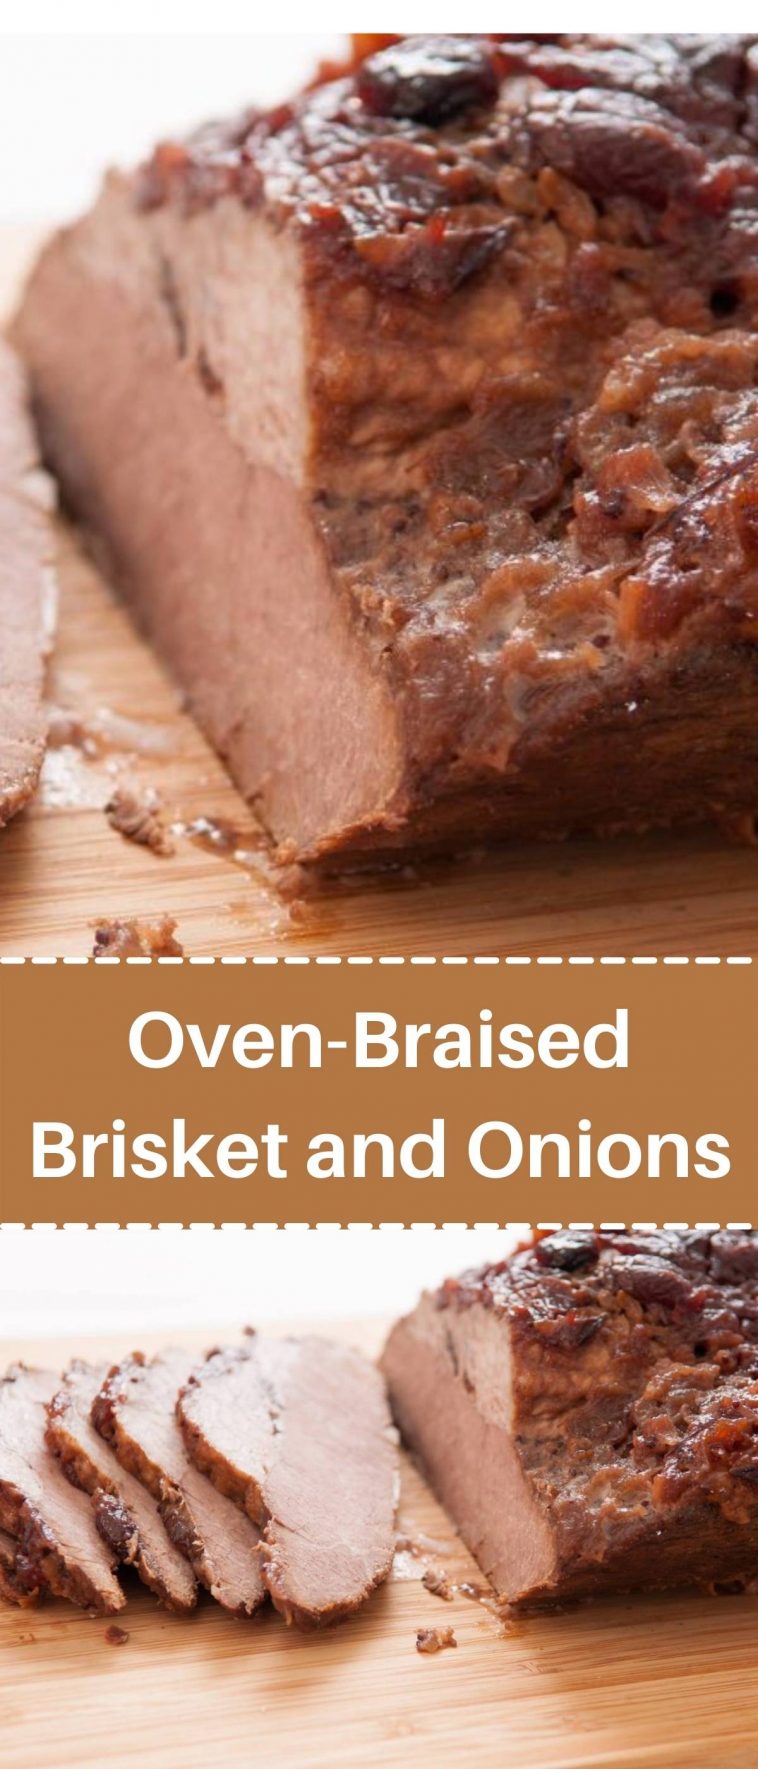 Oven-Braised Brisket and Onions